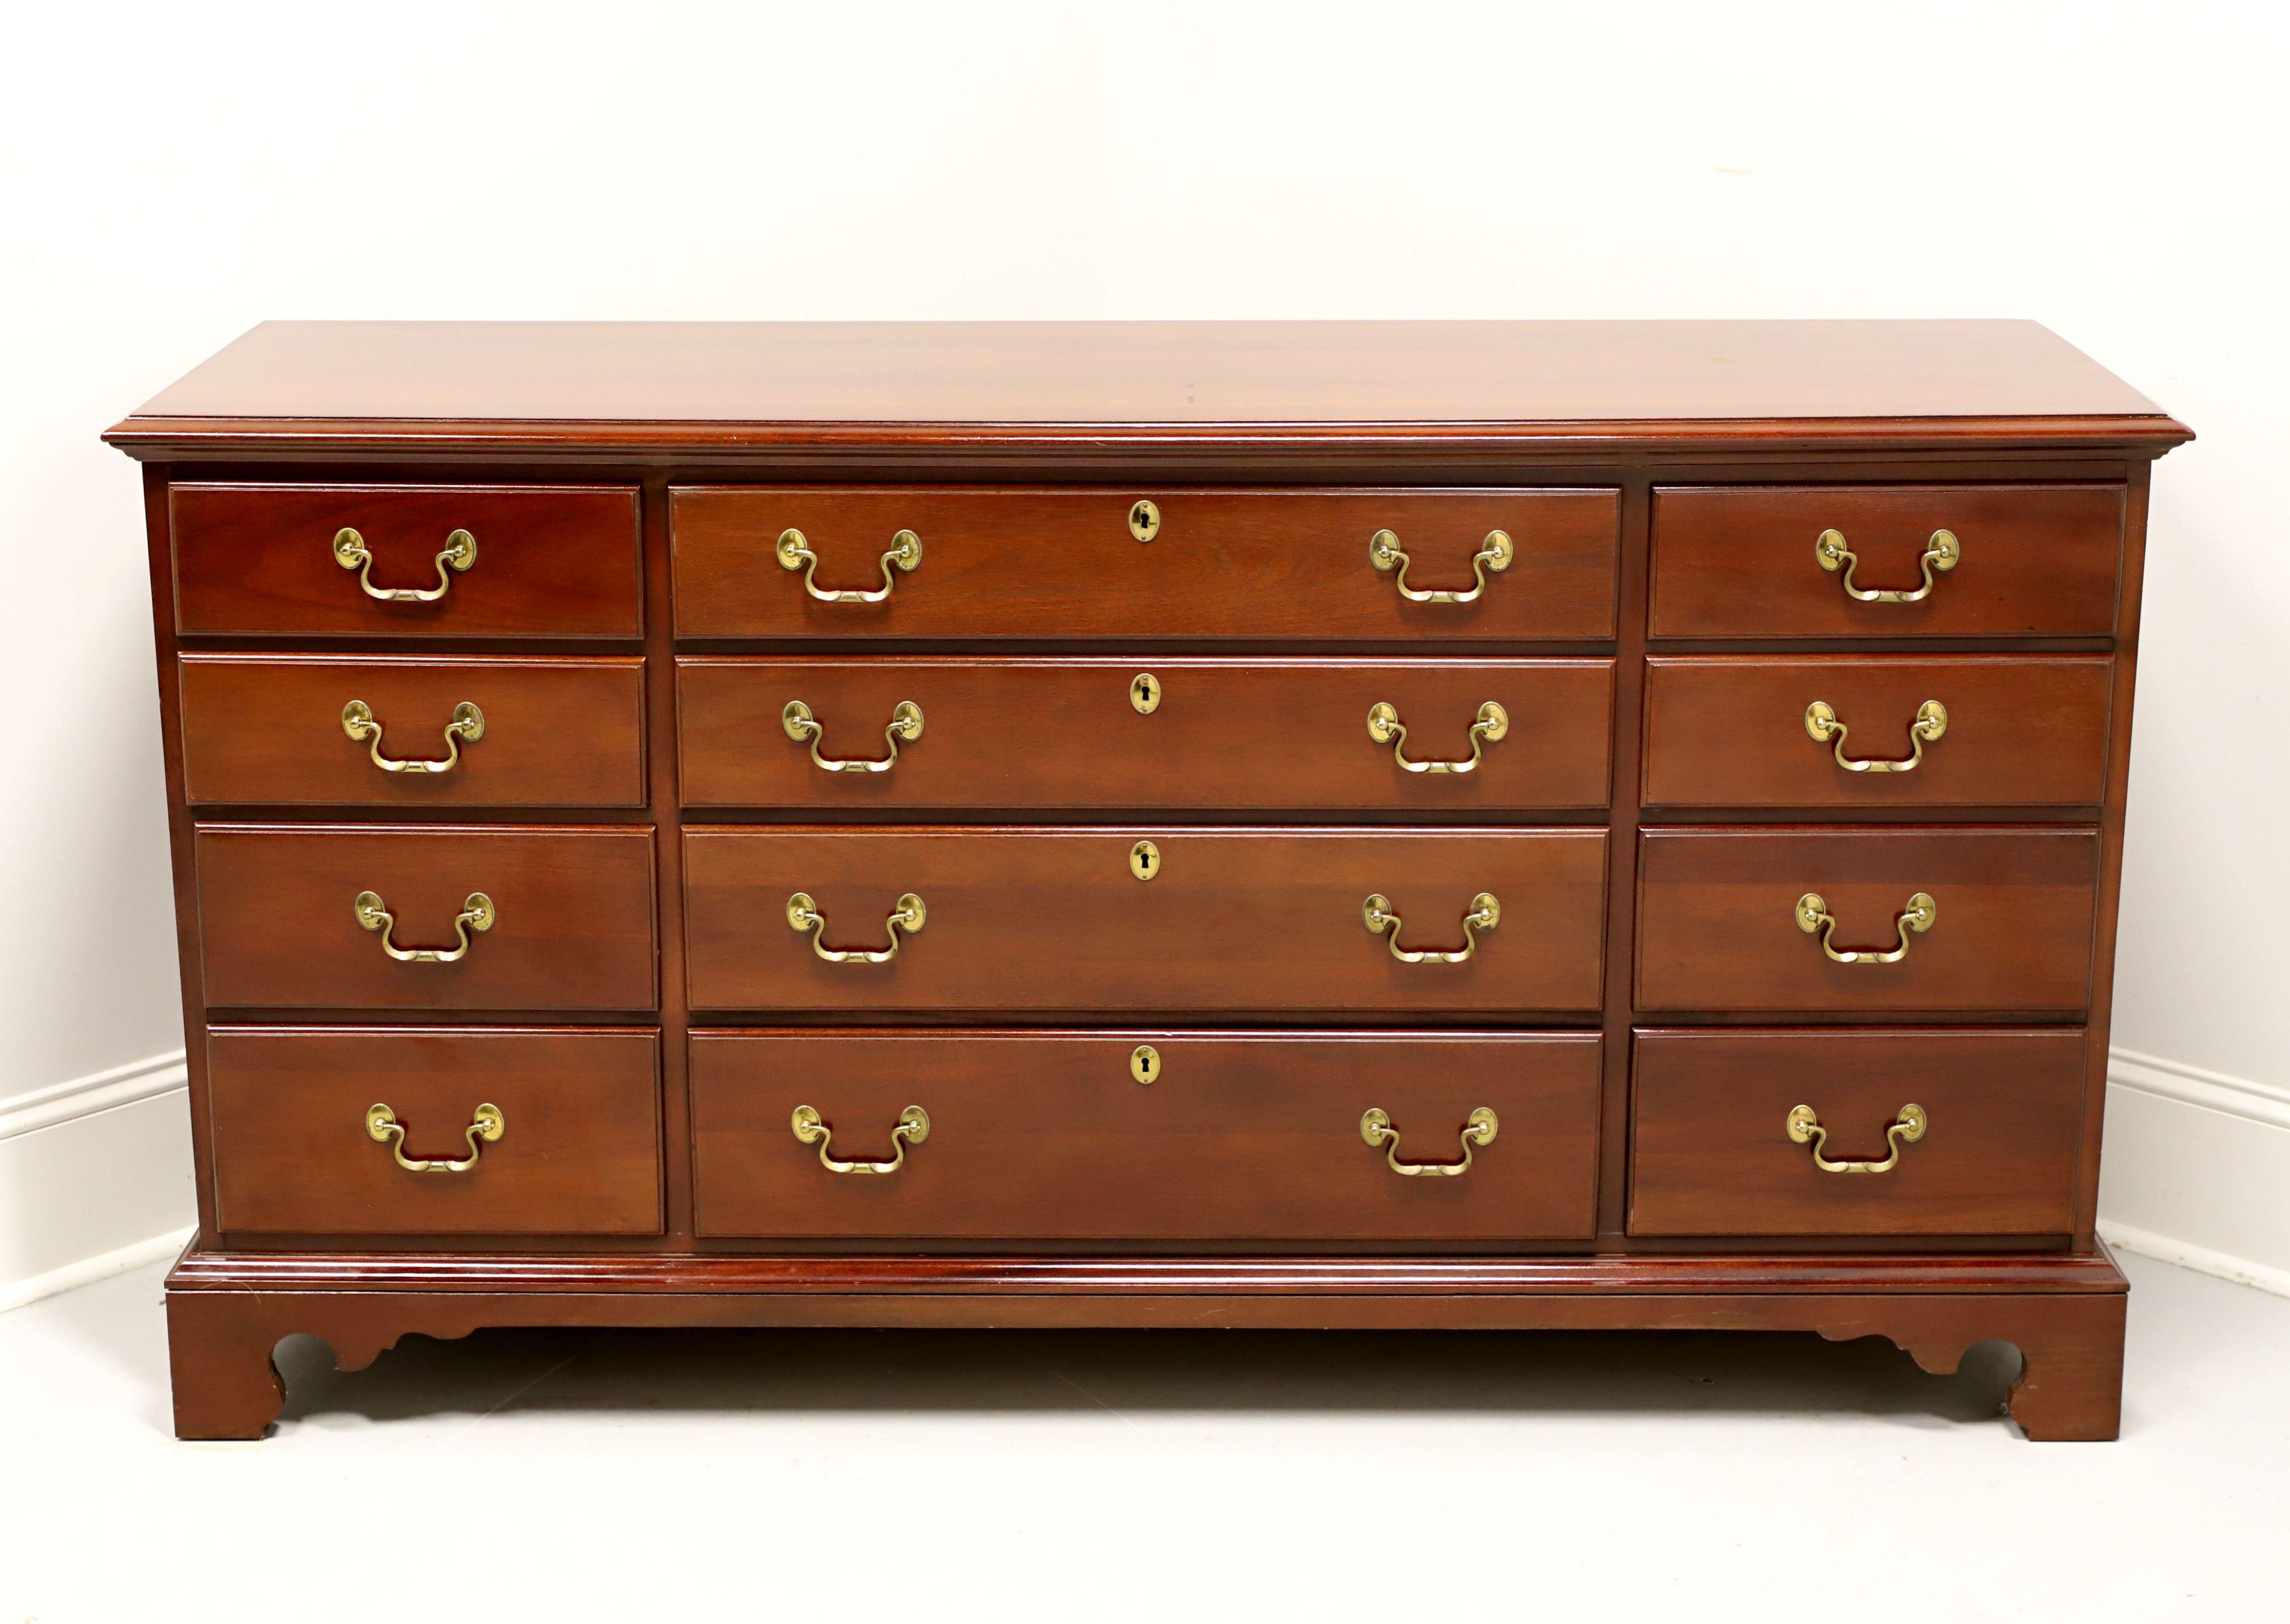 A Chippendale style triple dresser by Link-Taylor, from their Heirloom Gallery, the Beaufort. Solid mahogany with brass hardware, bevel edge to the top, and bracket feet. Features twelve drawers of dovetail construction, four center with faux